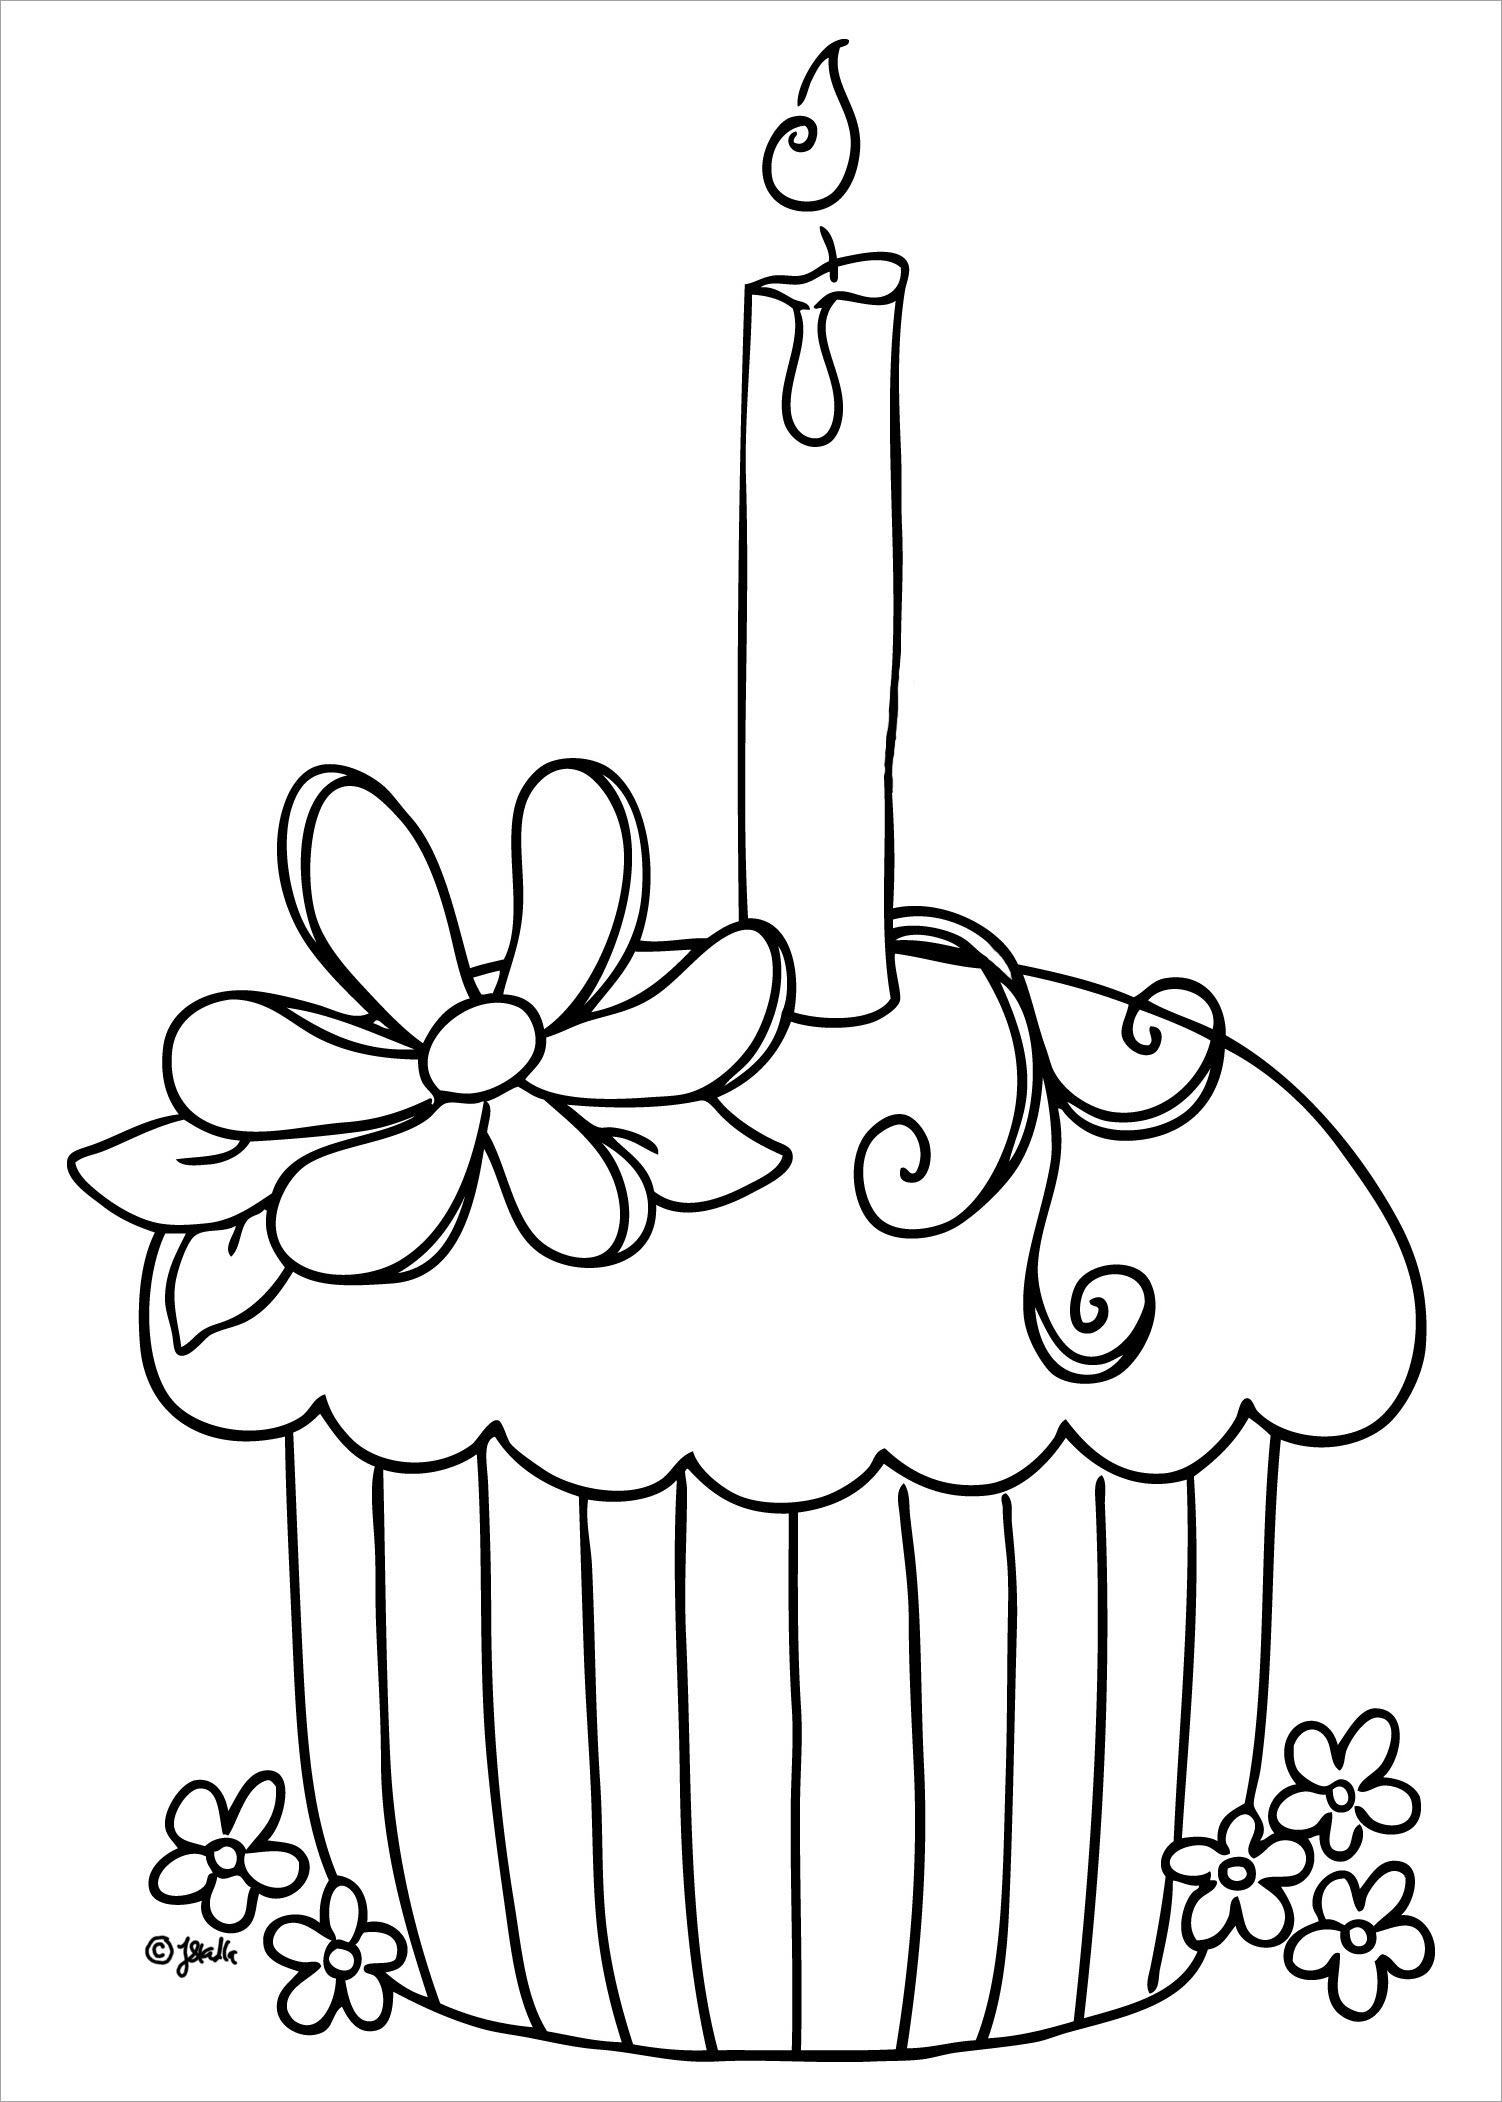 Beautiful birthday cake coloring pages for kids